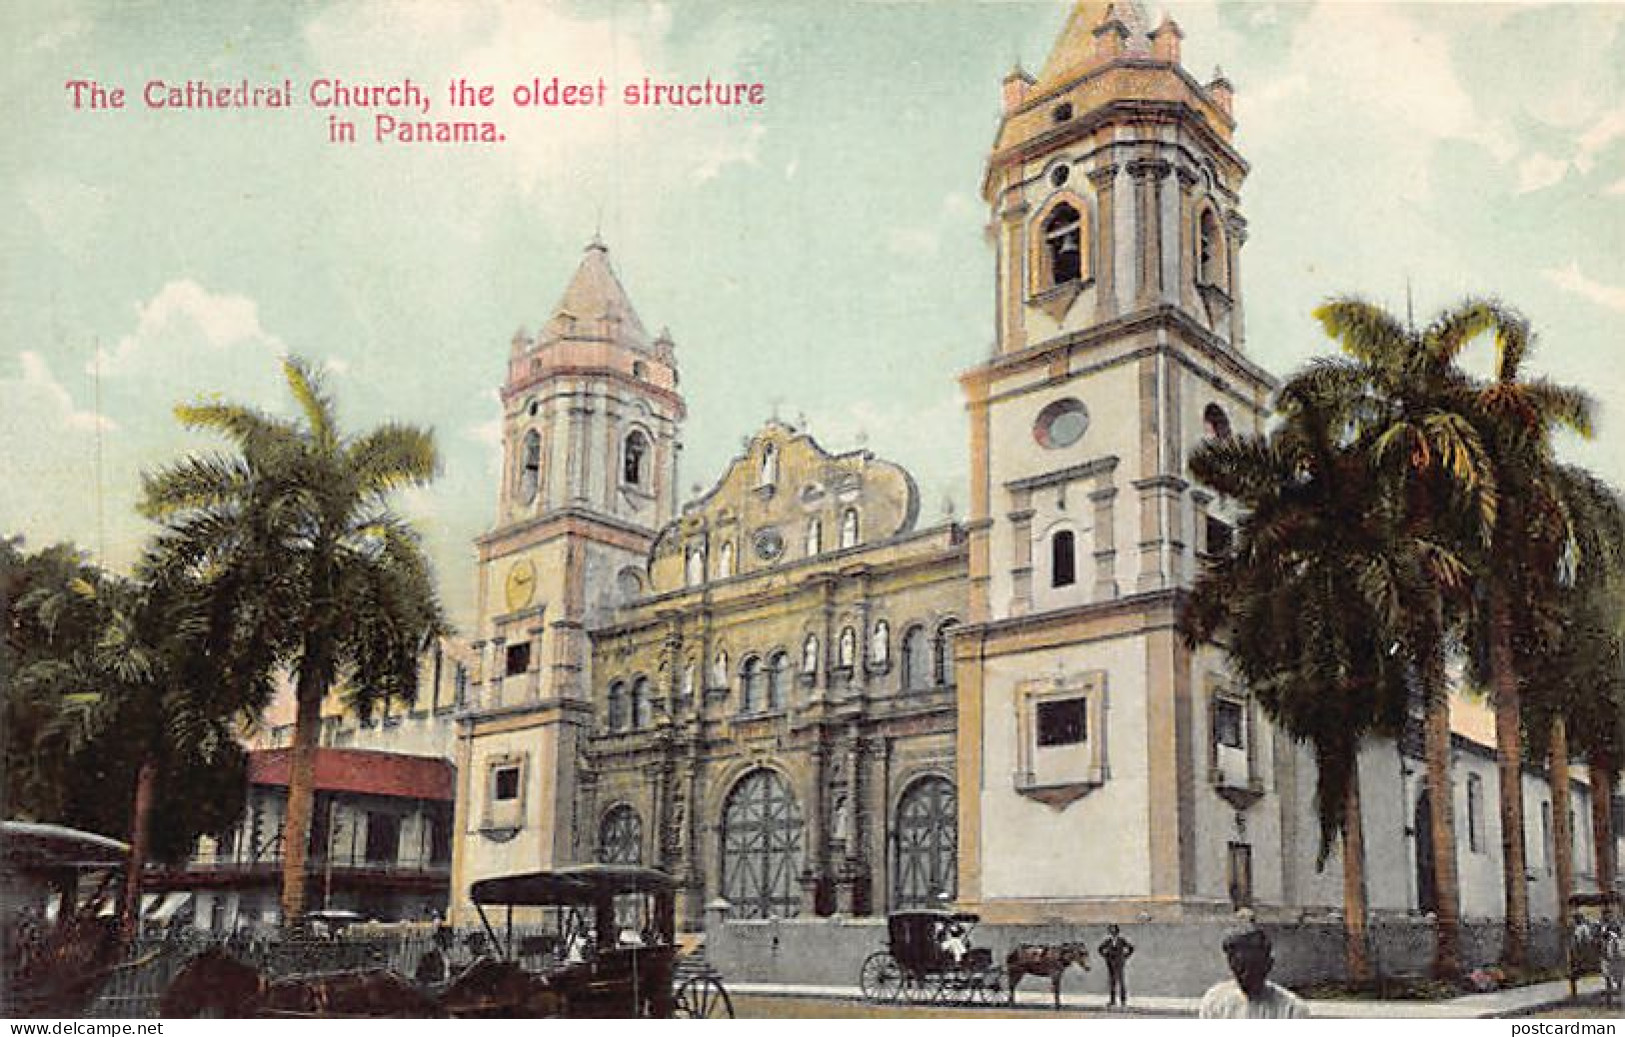 Ciudad De Panamá - The Cathedral Church, The Oldest Structure In Panama - Publ. I. L. Maduro Jr. 148C - Panamá